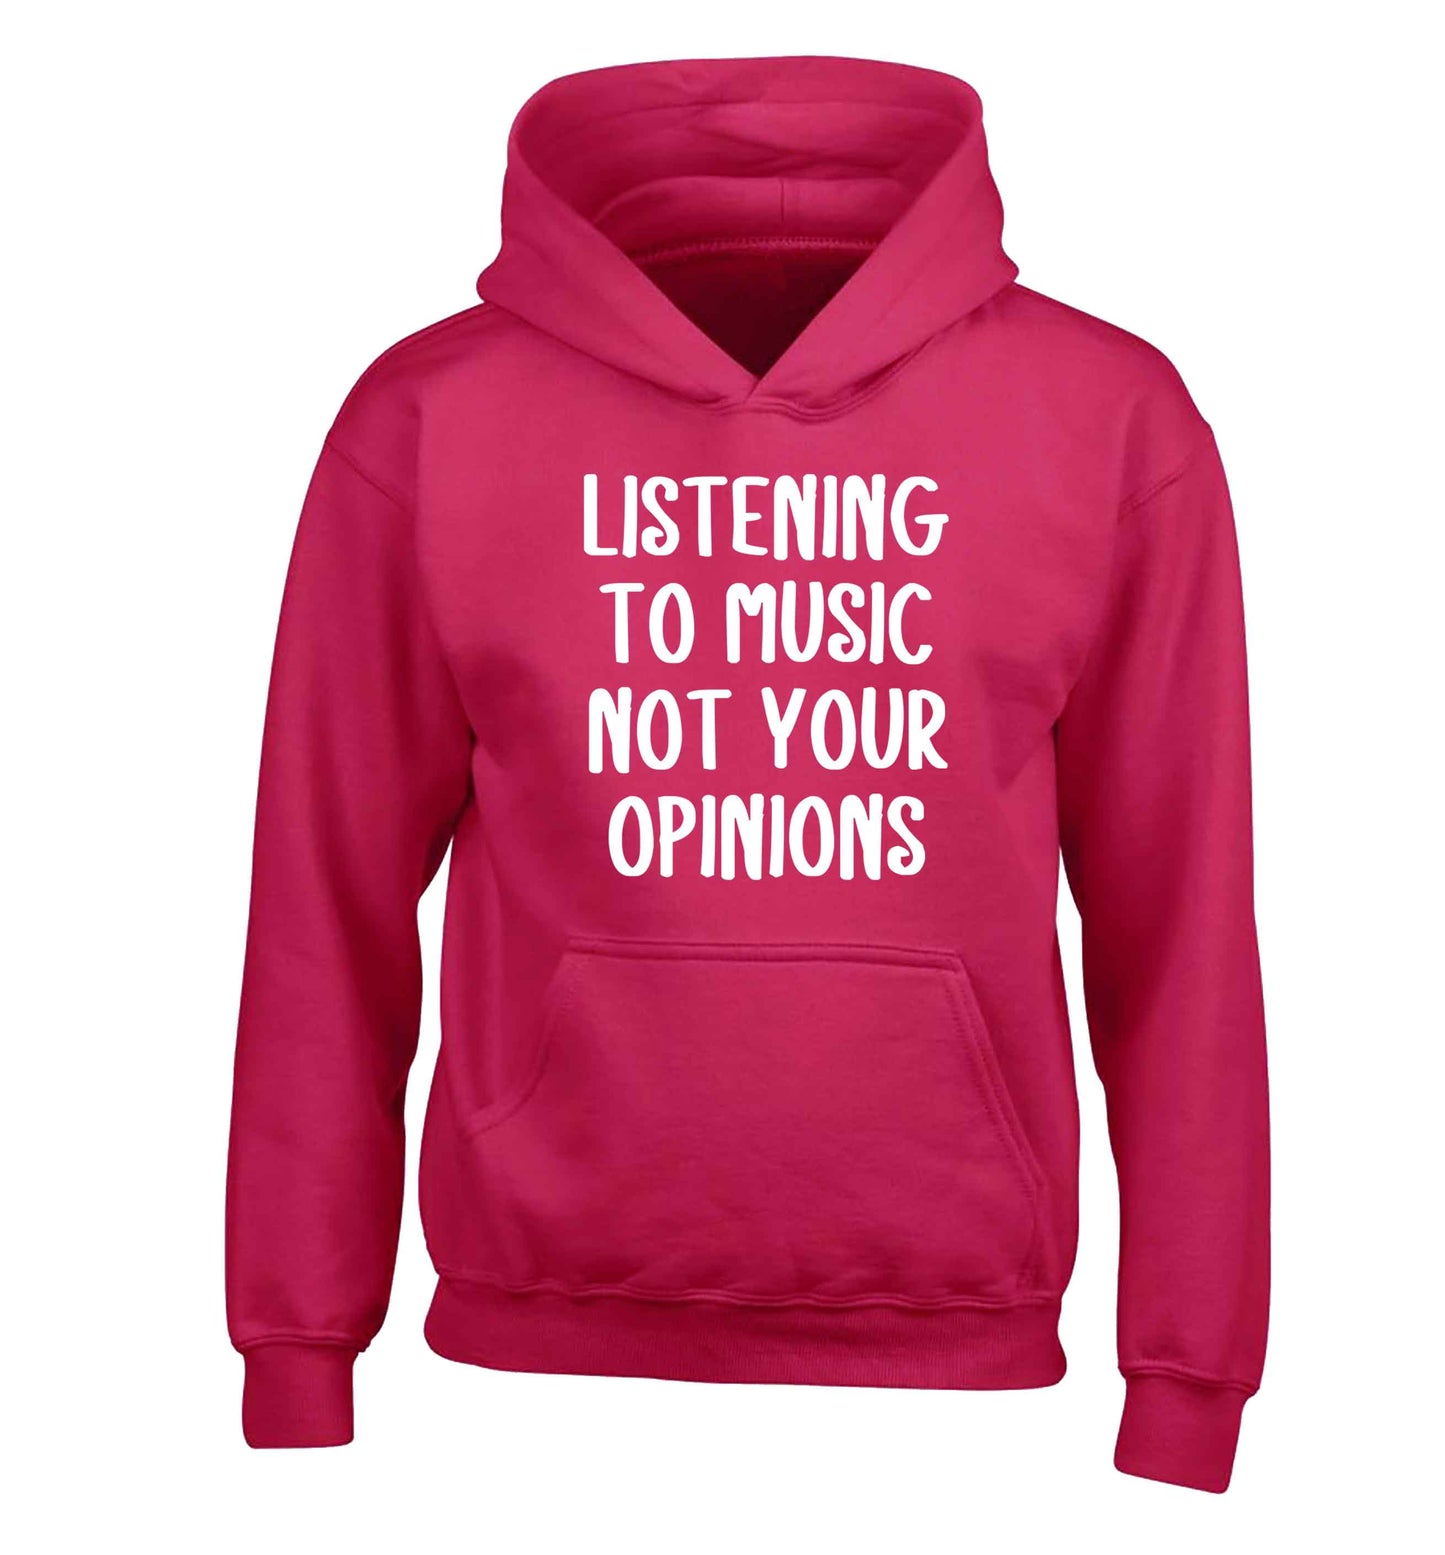 Listening to music not your opinions children's pink hoodie 12-13 Years